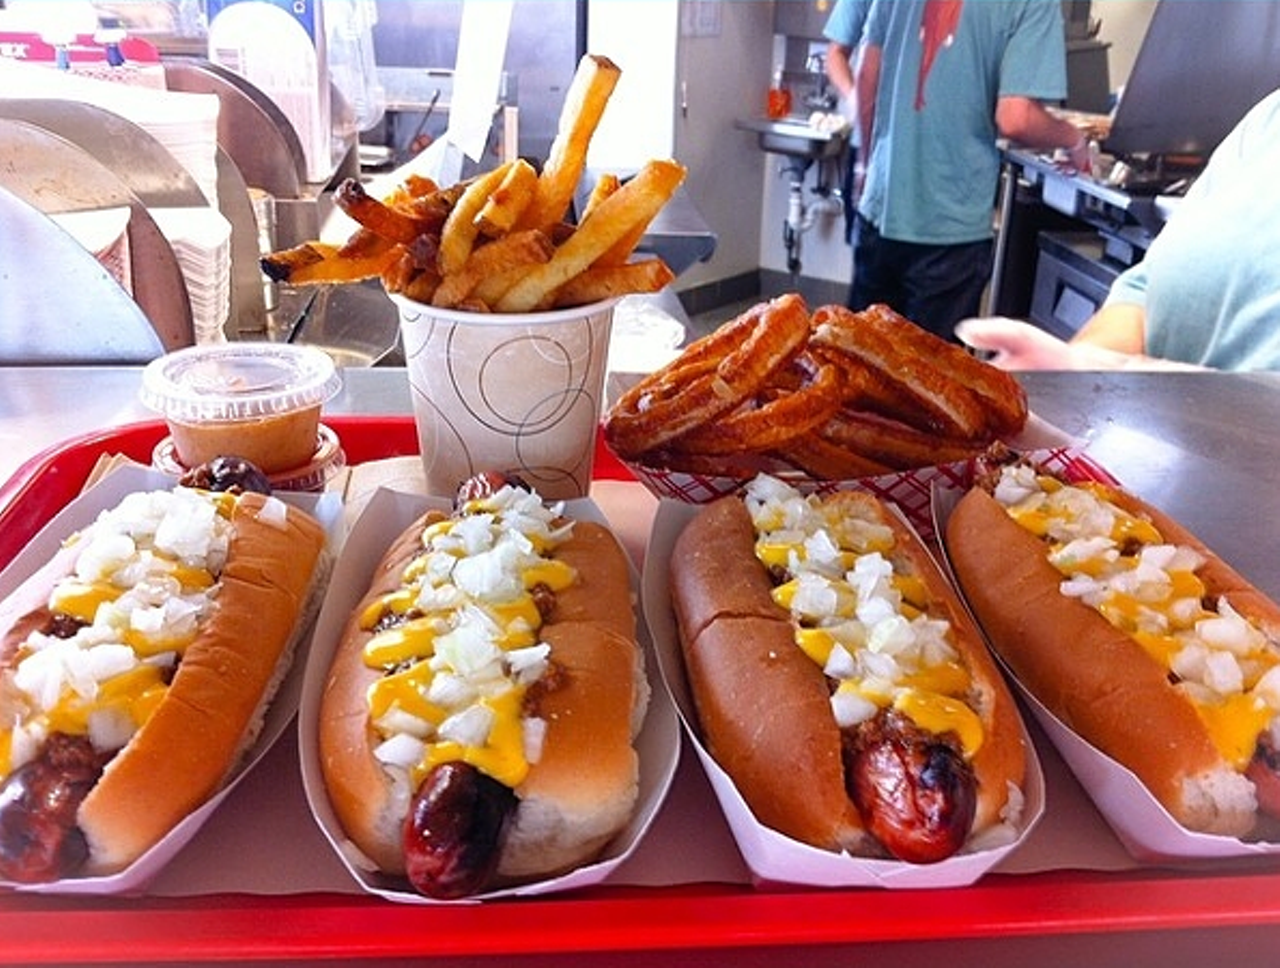 Retro Dog Challenge
Where: Retro Dog - 350 E. Steels Corner, Cuyahoga Falls
Challenge: Finish nine hot dogs, two burgers, fries, onions rings, a root beer, and a retro-bomb (combo sundae and milkshake).
Prize: A t-shirt and the meal is free.
Cost: Approx. $60